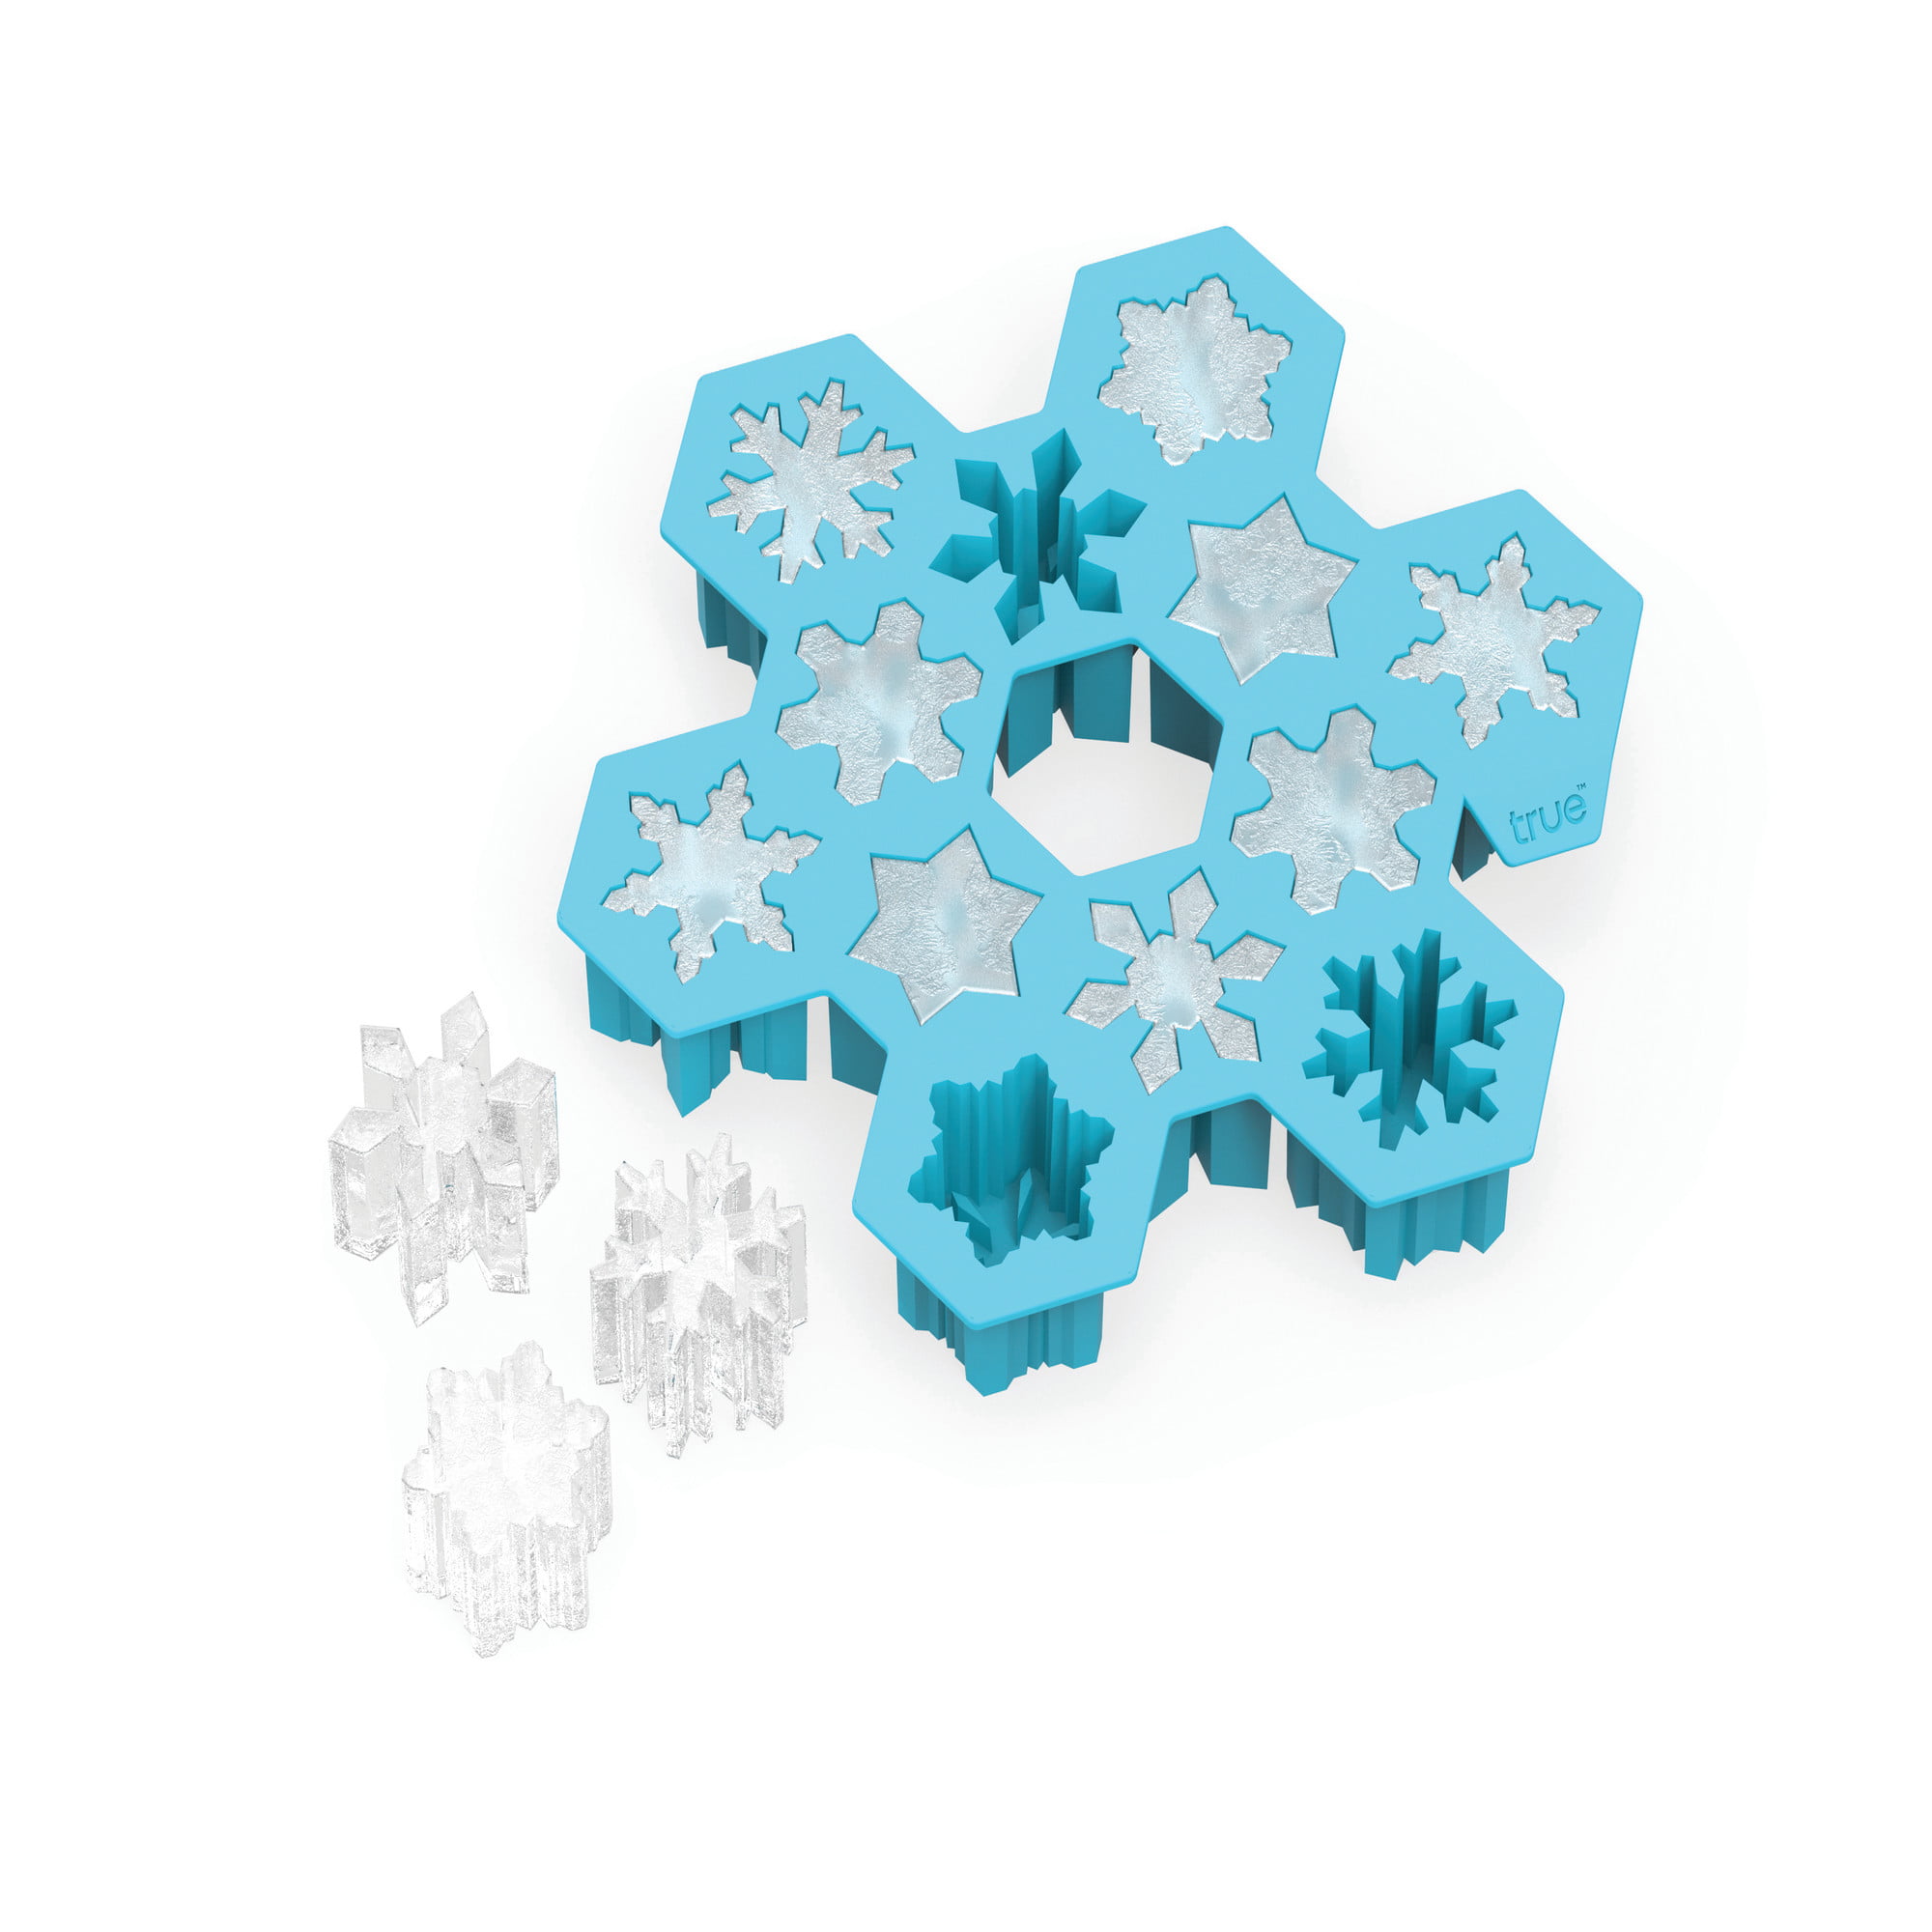 True Zoo Snowflake S Ilicone Ice Cube Tray, Novelty Ice Mold, Large Ice  Cube Mold, Makes 12 Ice Cubes, Snow Ice Tray, Blue, Set Of 1, Gagets